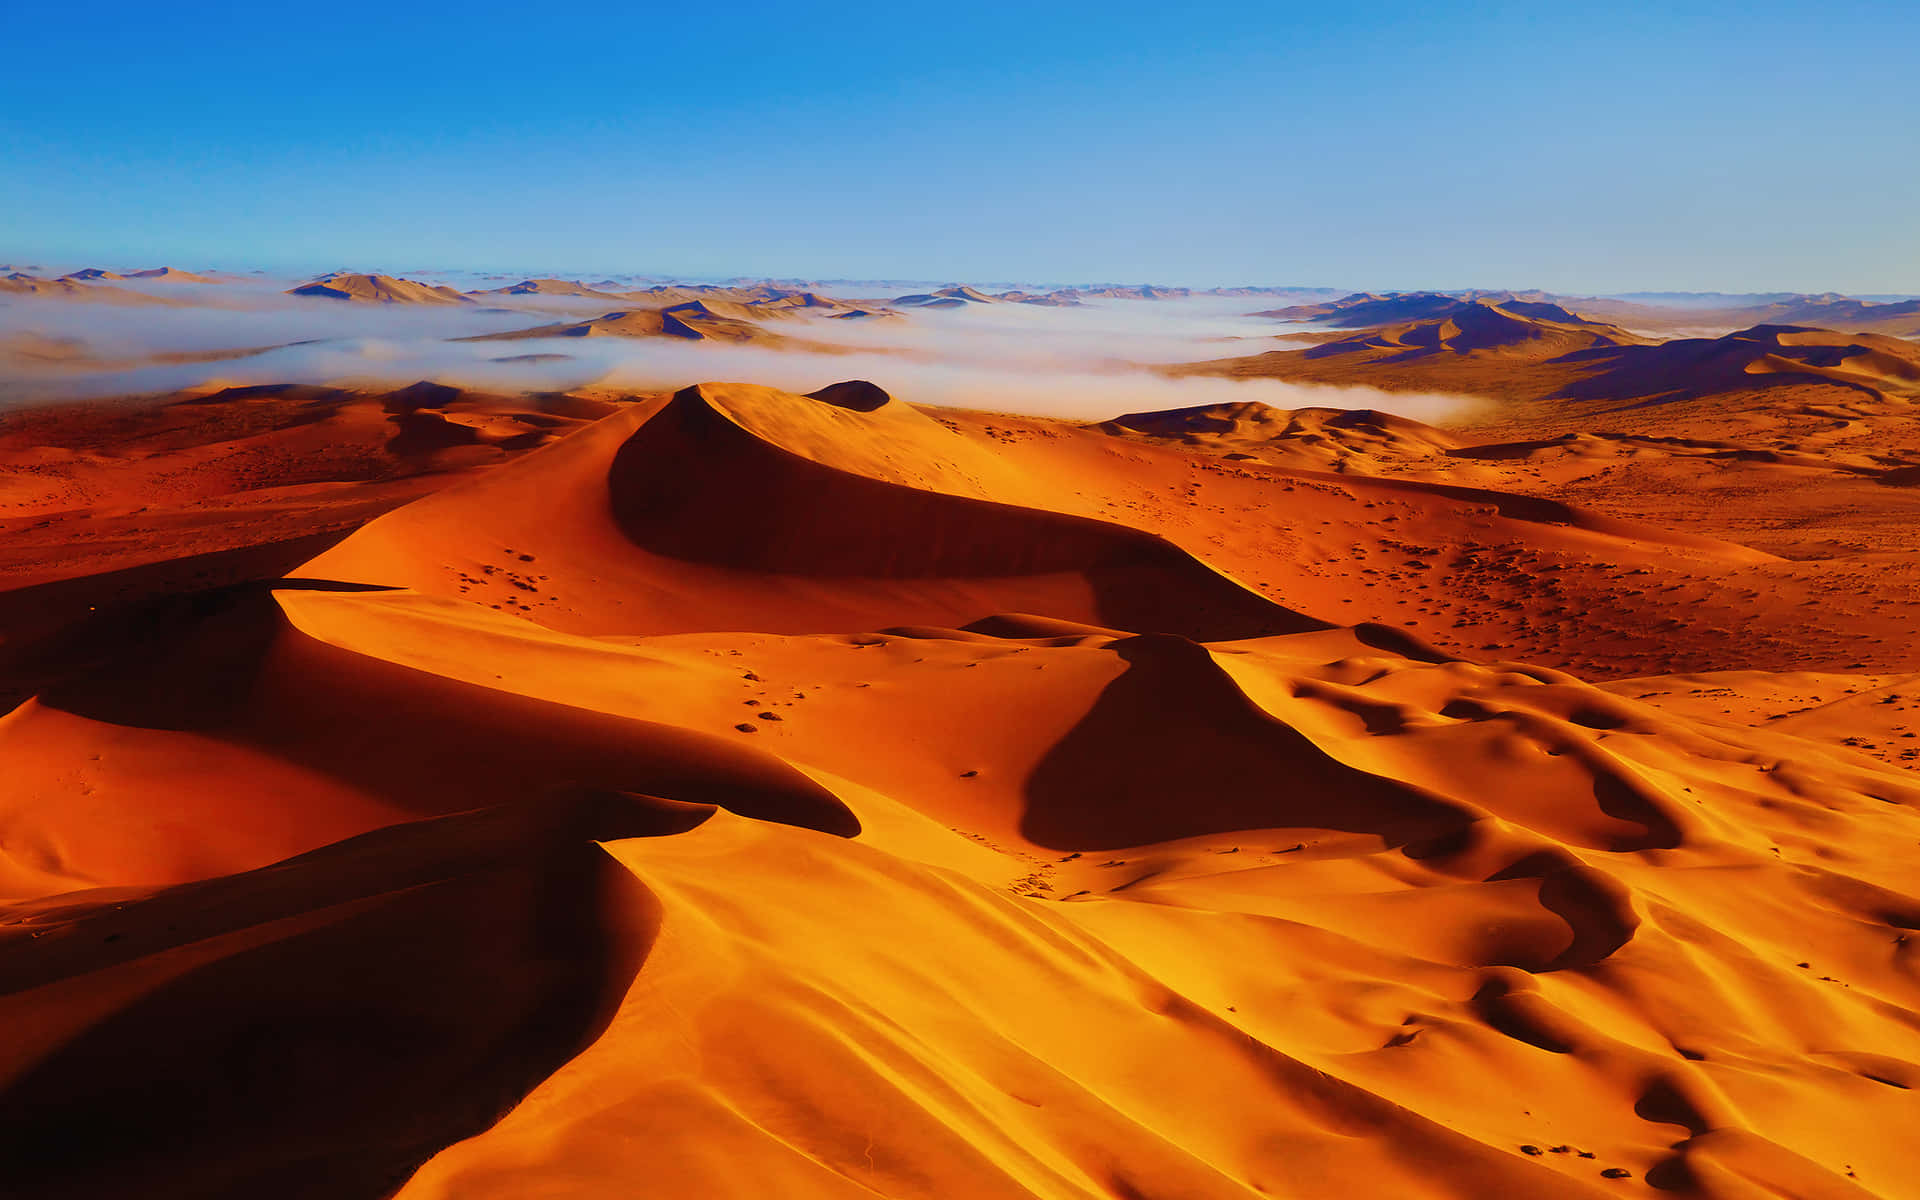 A beautiful and tranquil desert scene.